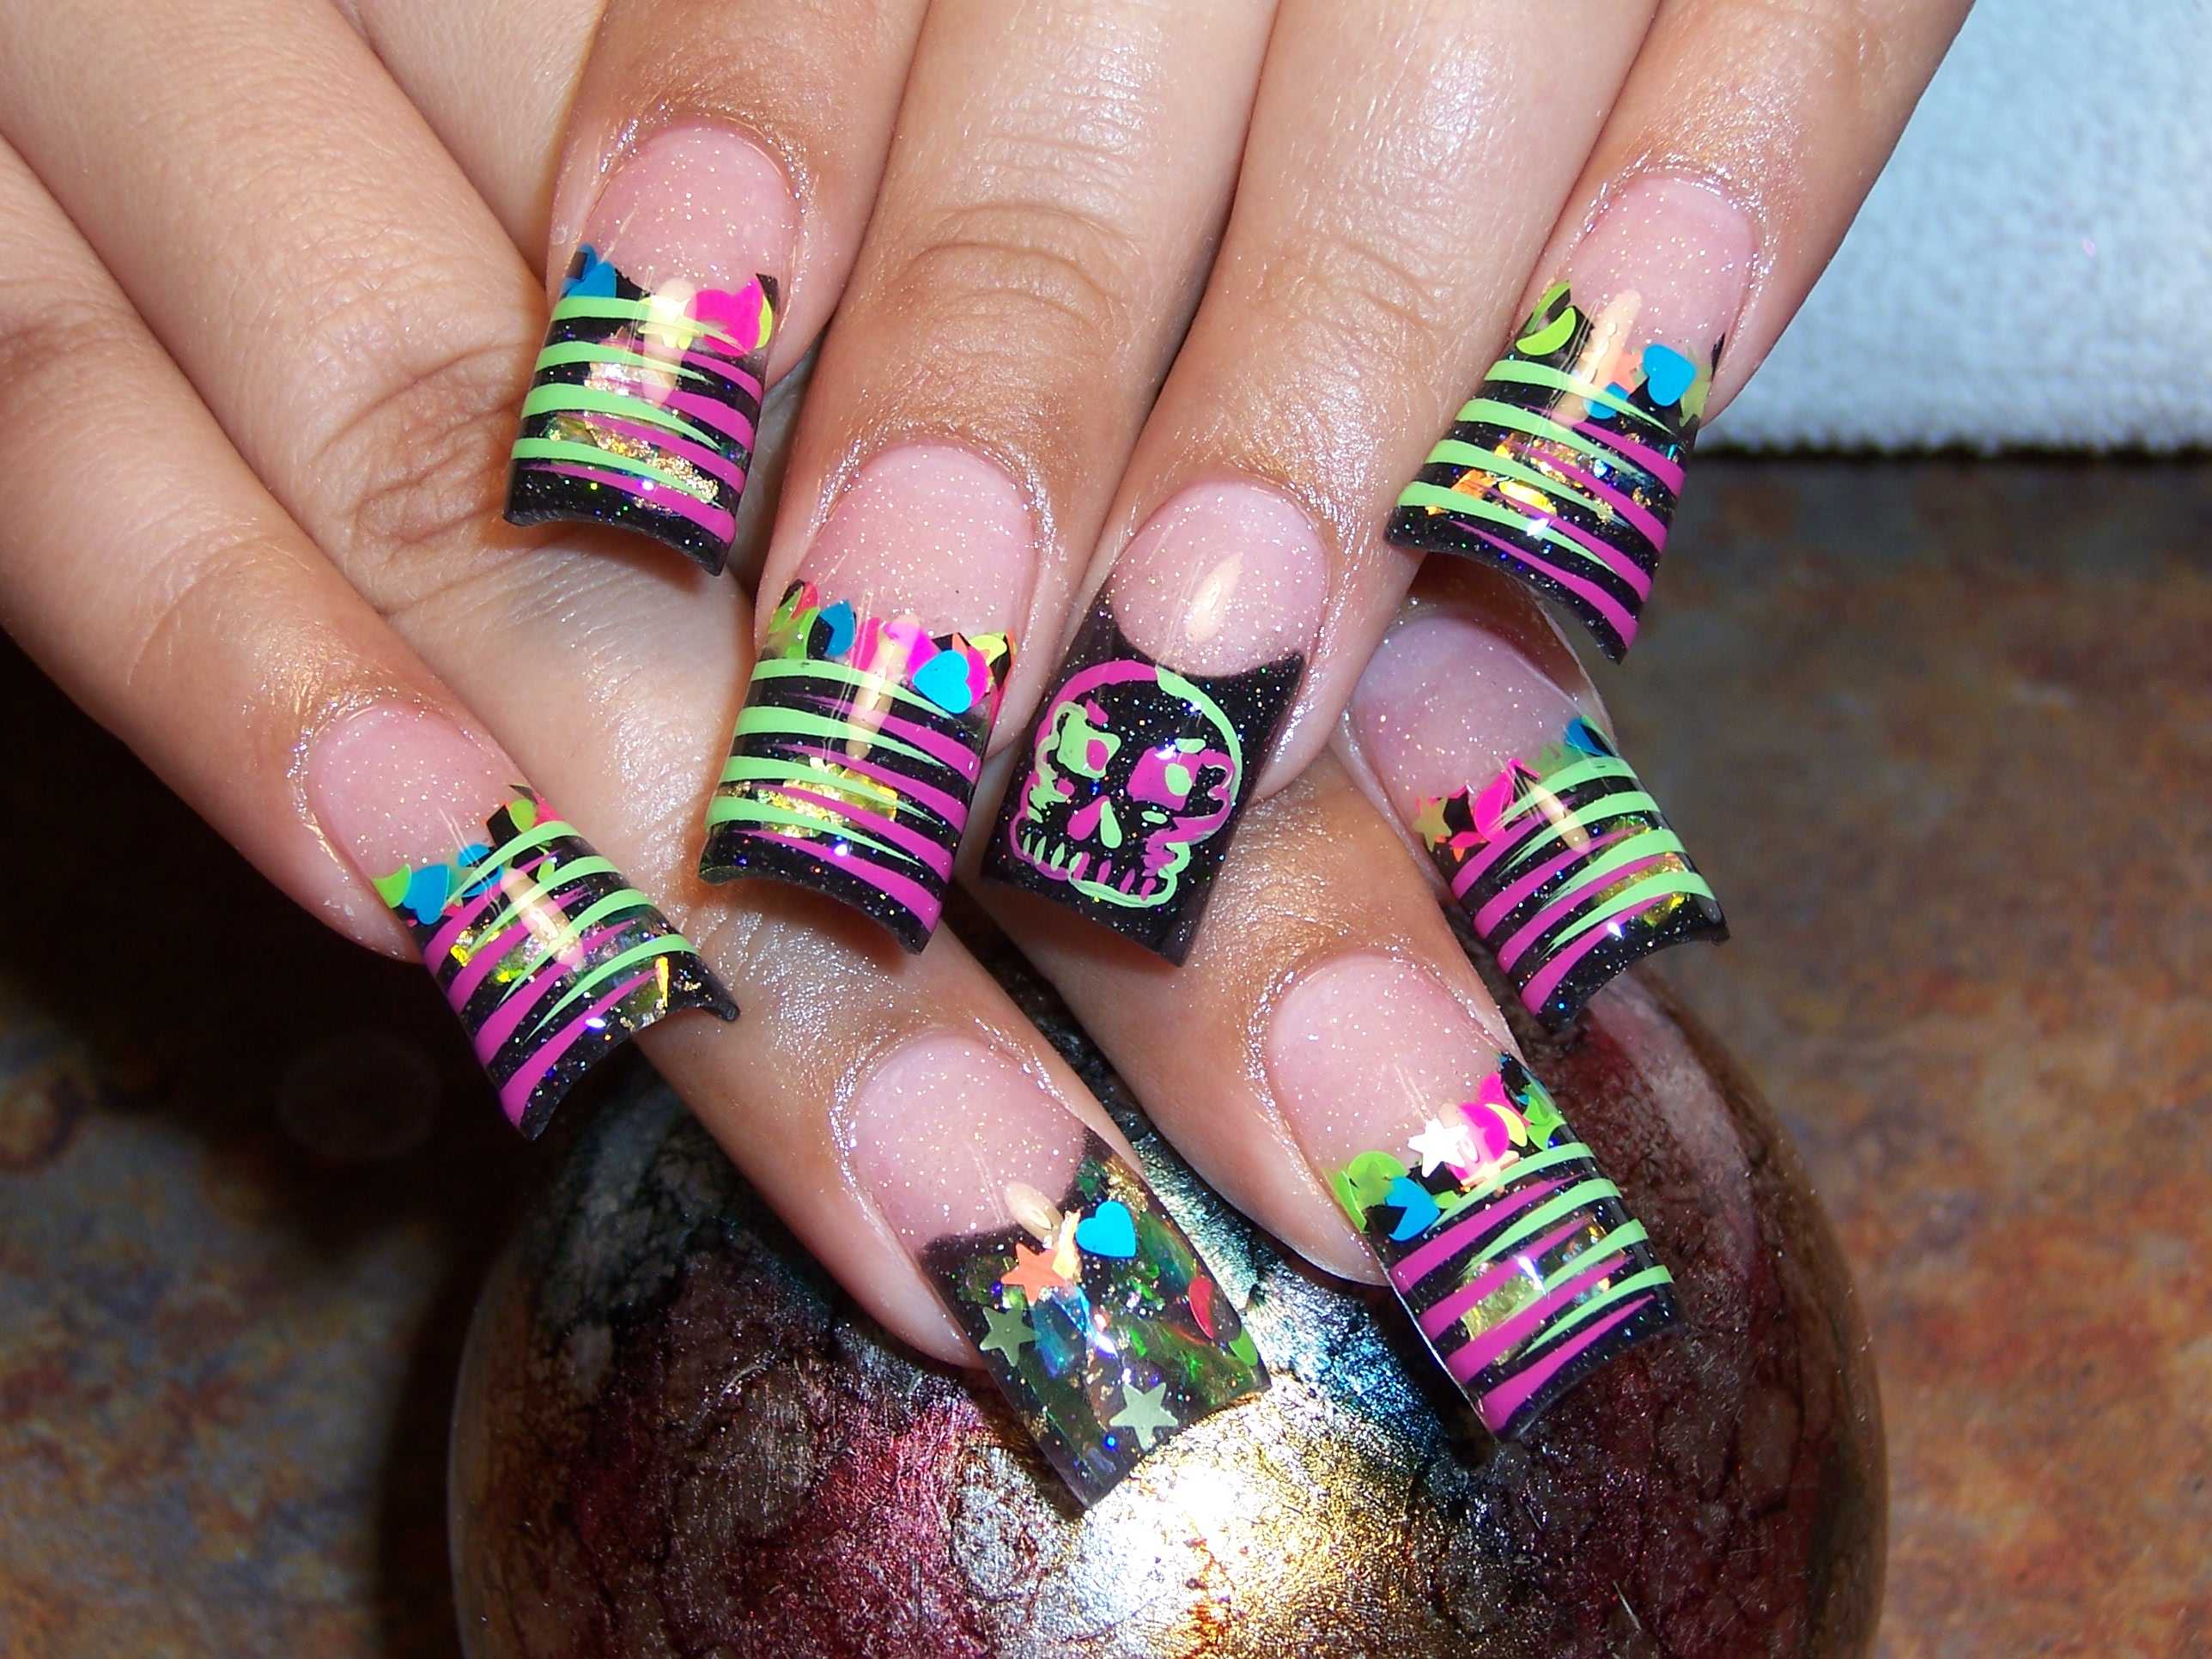 5. "Nail Art Swag Tumblr" - 20 Must-Try Swag Nail Designs for Every Occasion - wide 4